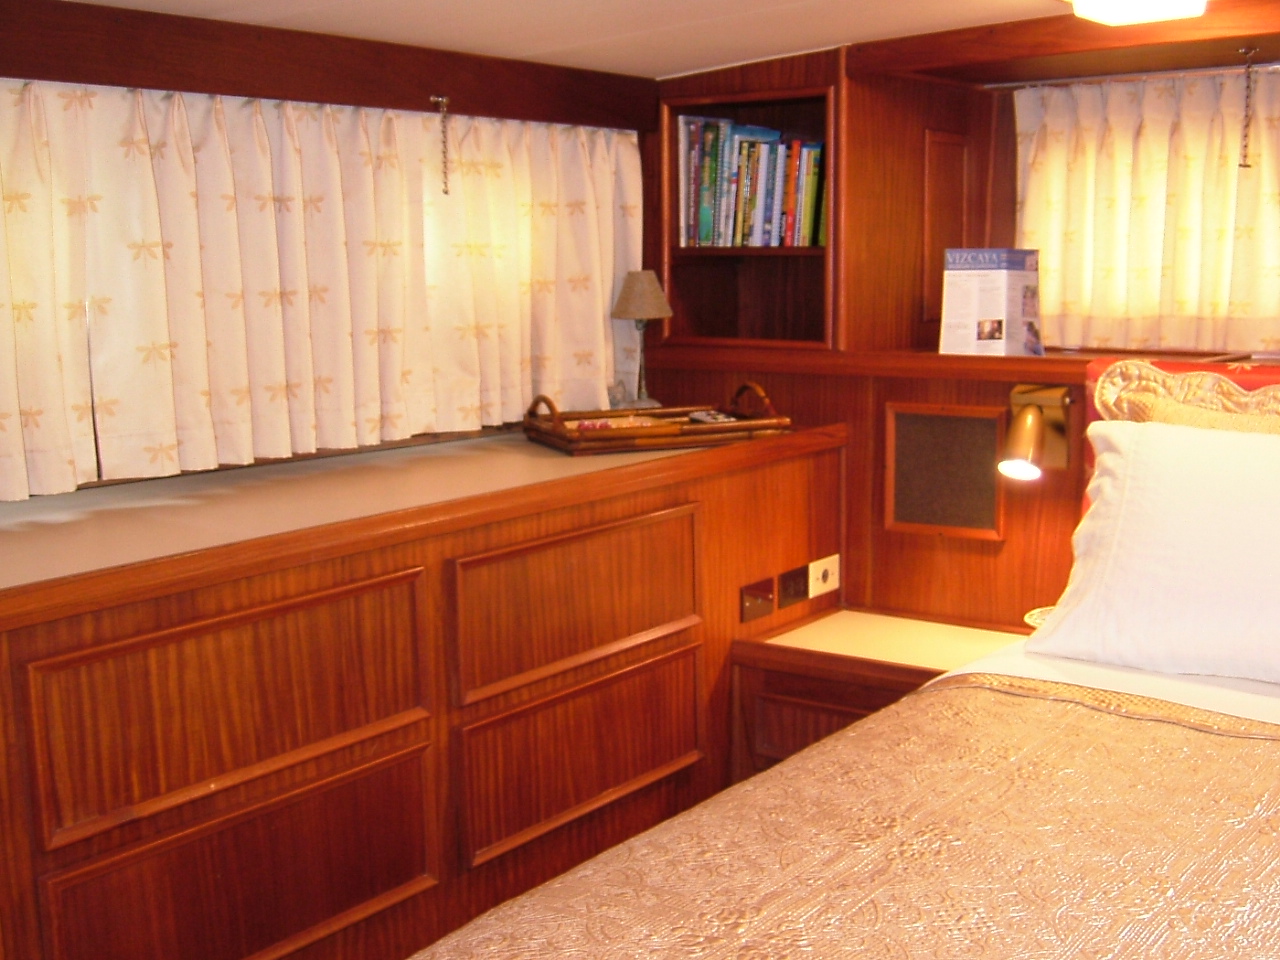 2 Master Stateroom, looking to starboard